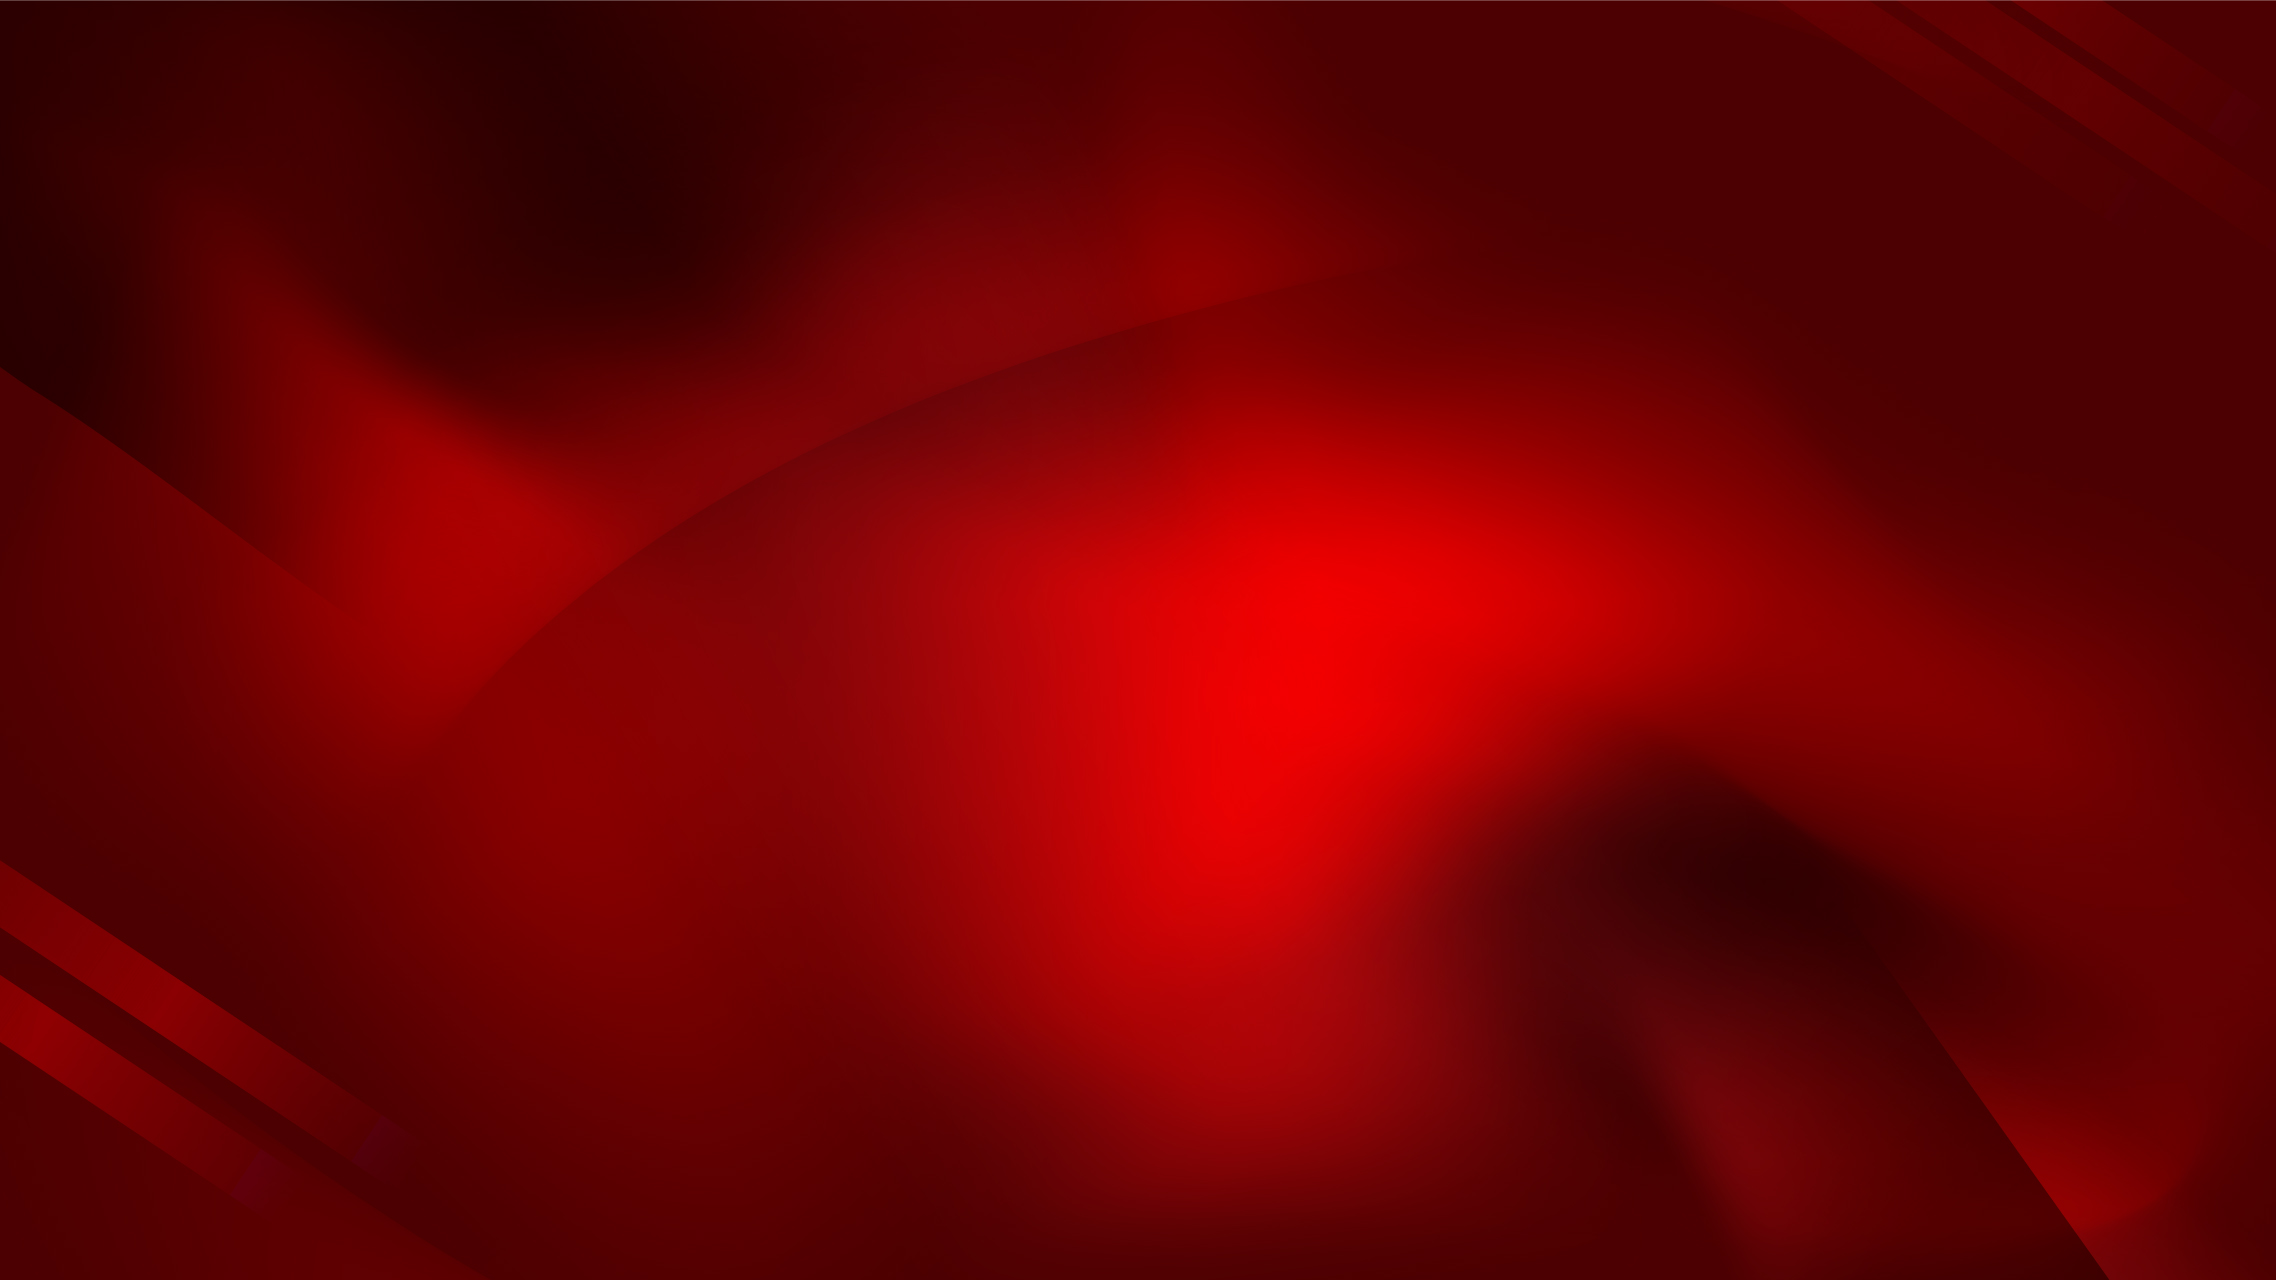 Red abstract background with lines and curves.